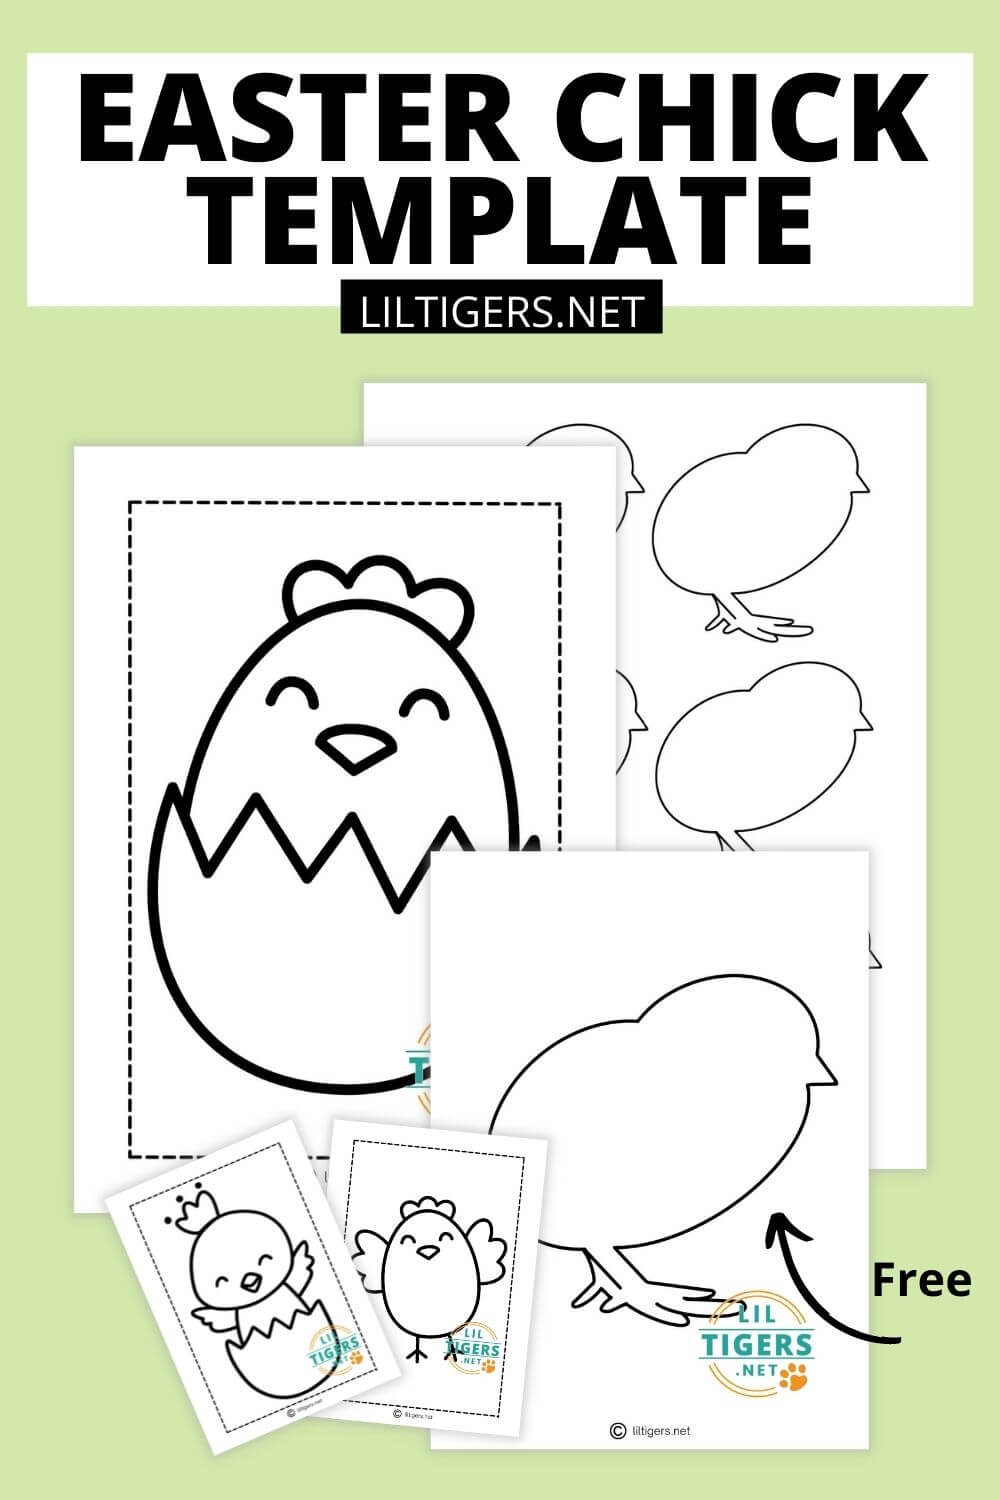 Free Printable Easter Chick Template and Coloring Pages   Lil Tigers